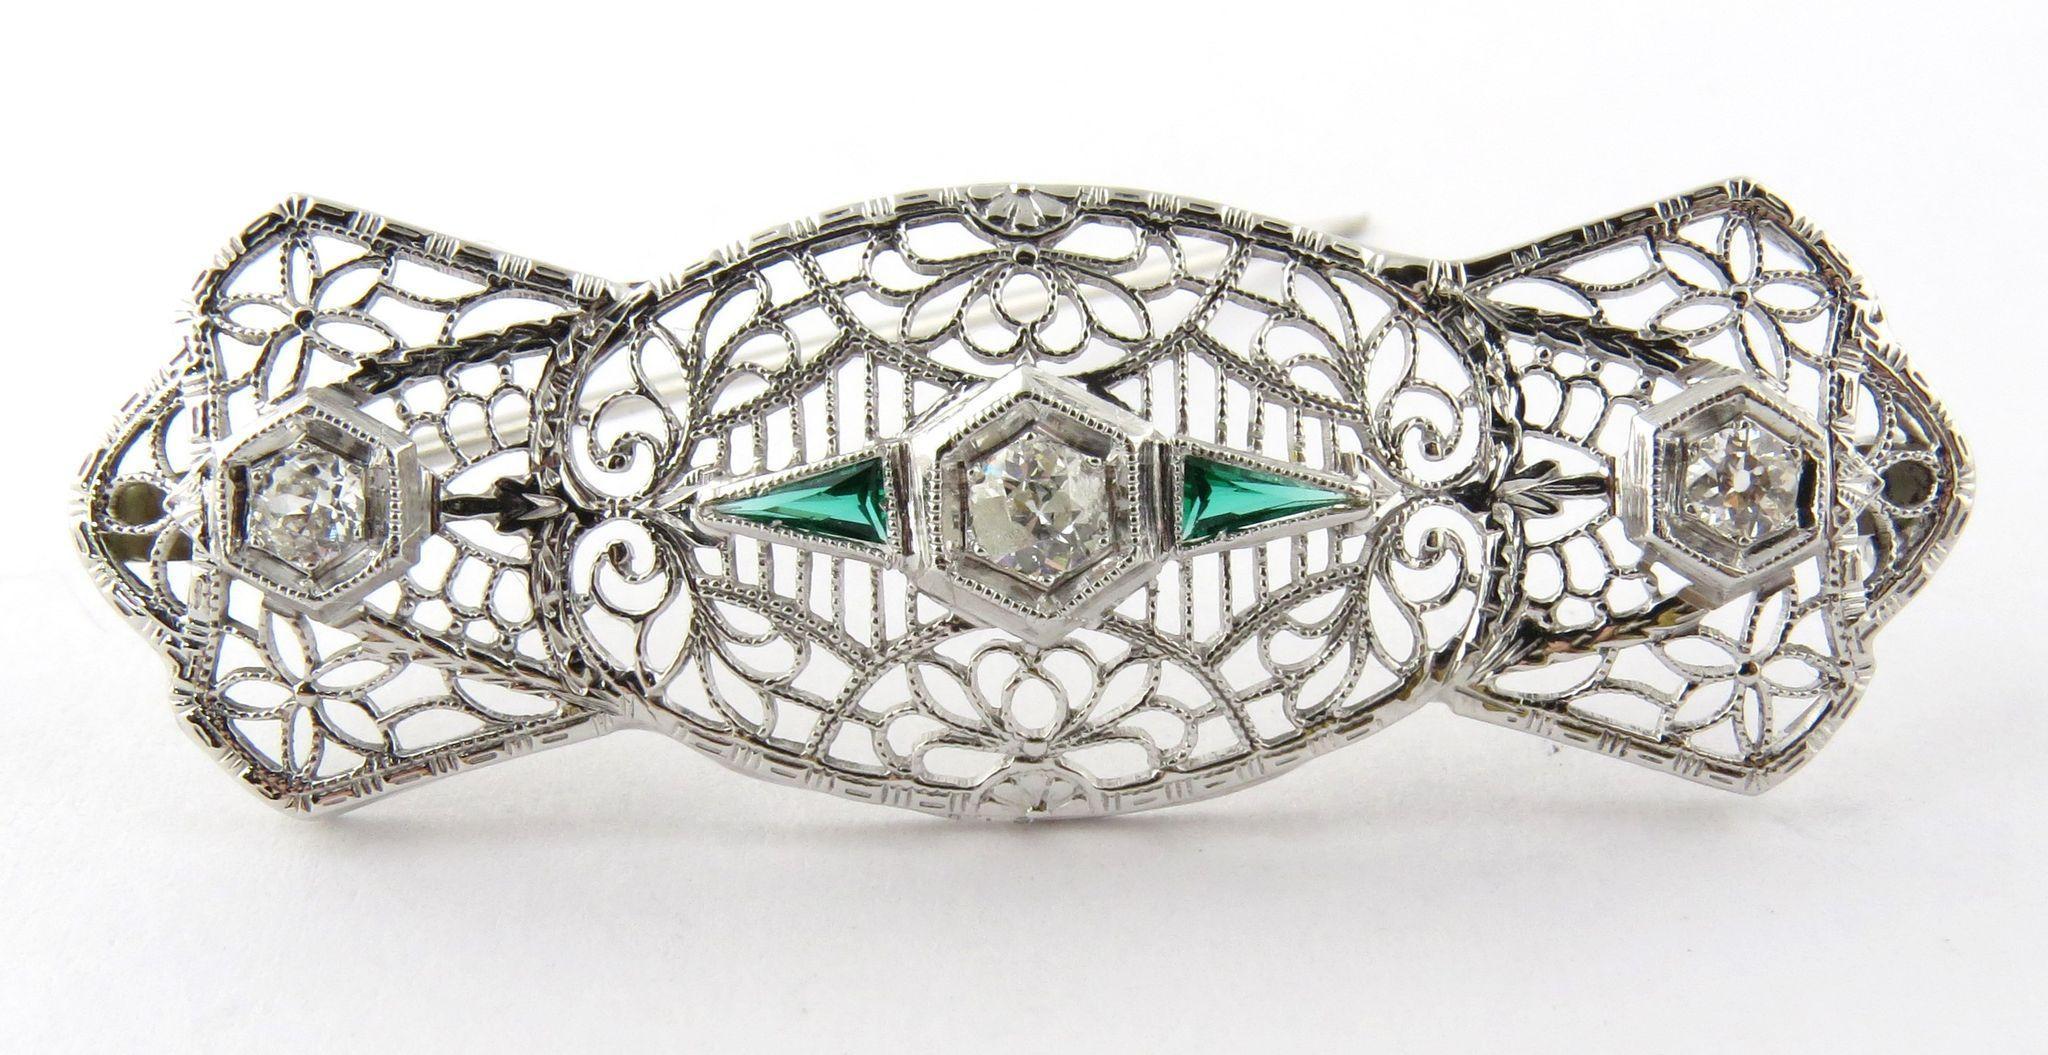 Antique 14K White Gold Art Deco Diamond and Emerald Filigree Brooch Pin. 

Lacy bow tie style brooch with 3 diamonds and 2 triangle emeralds. 

Measures: 47mm x 15mm (1 13/16